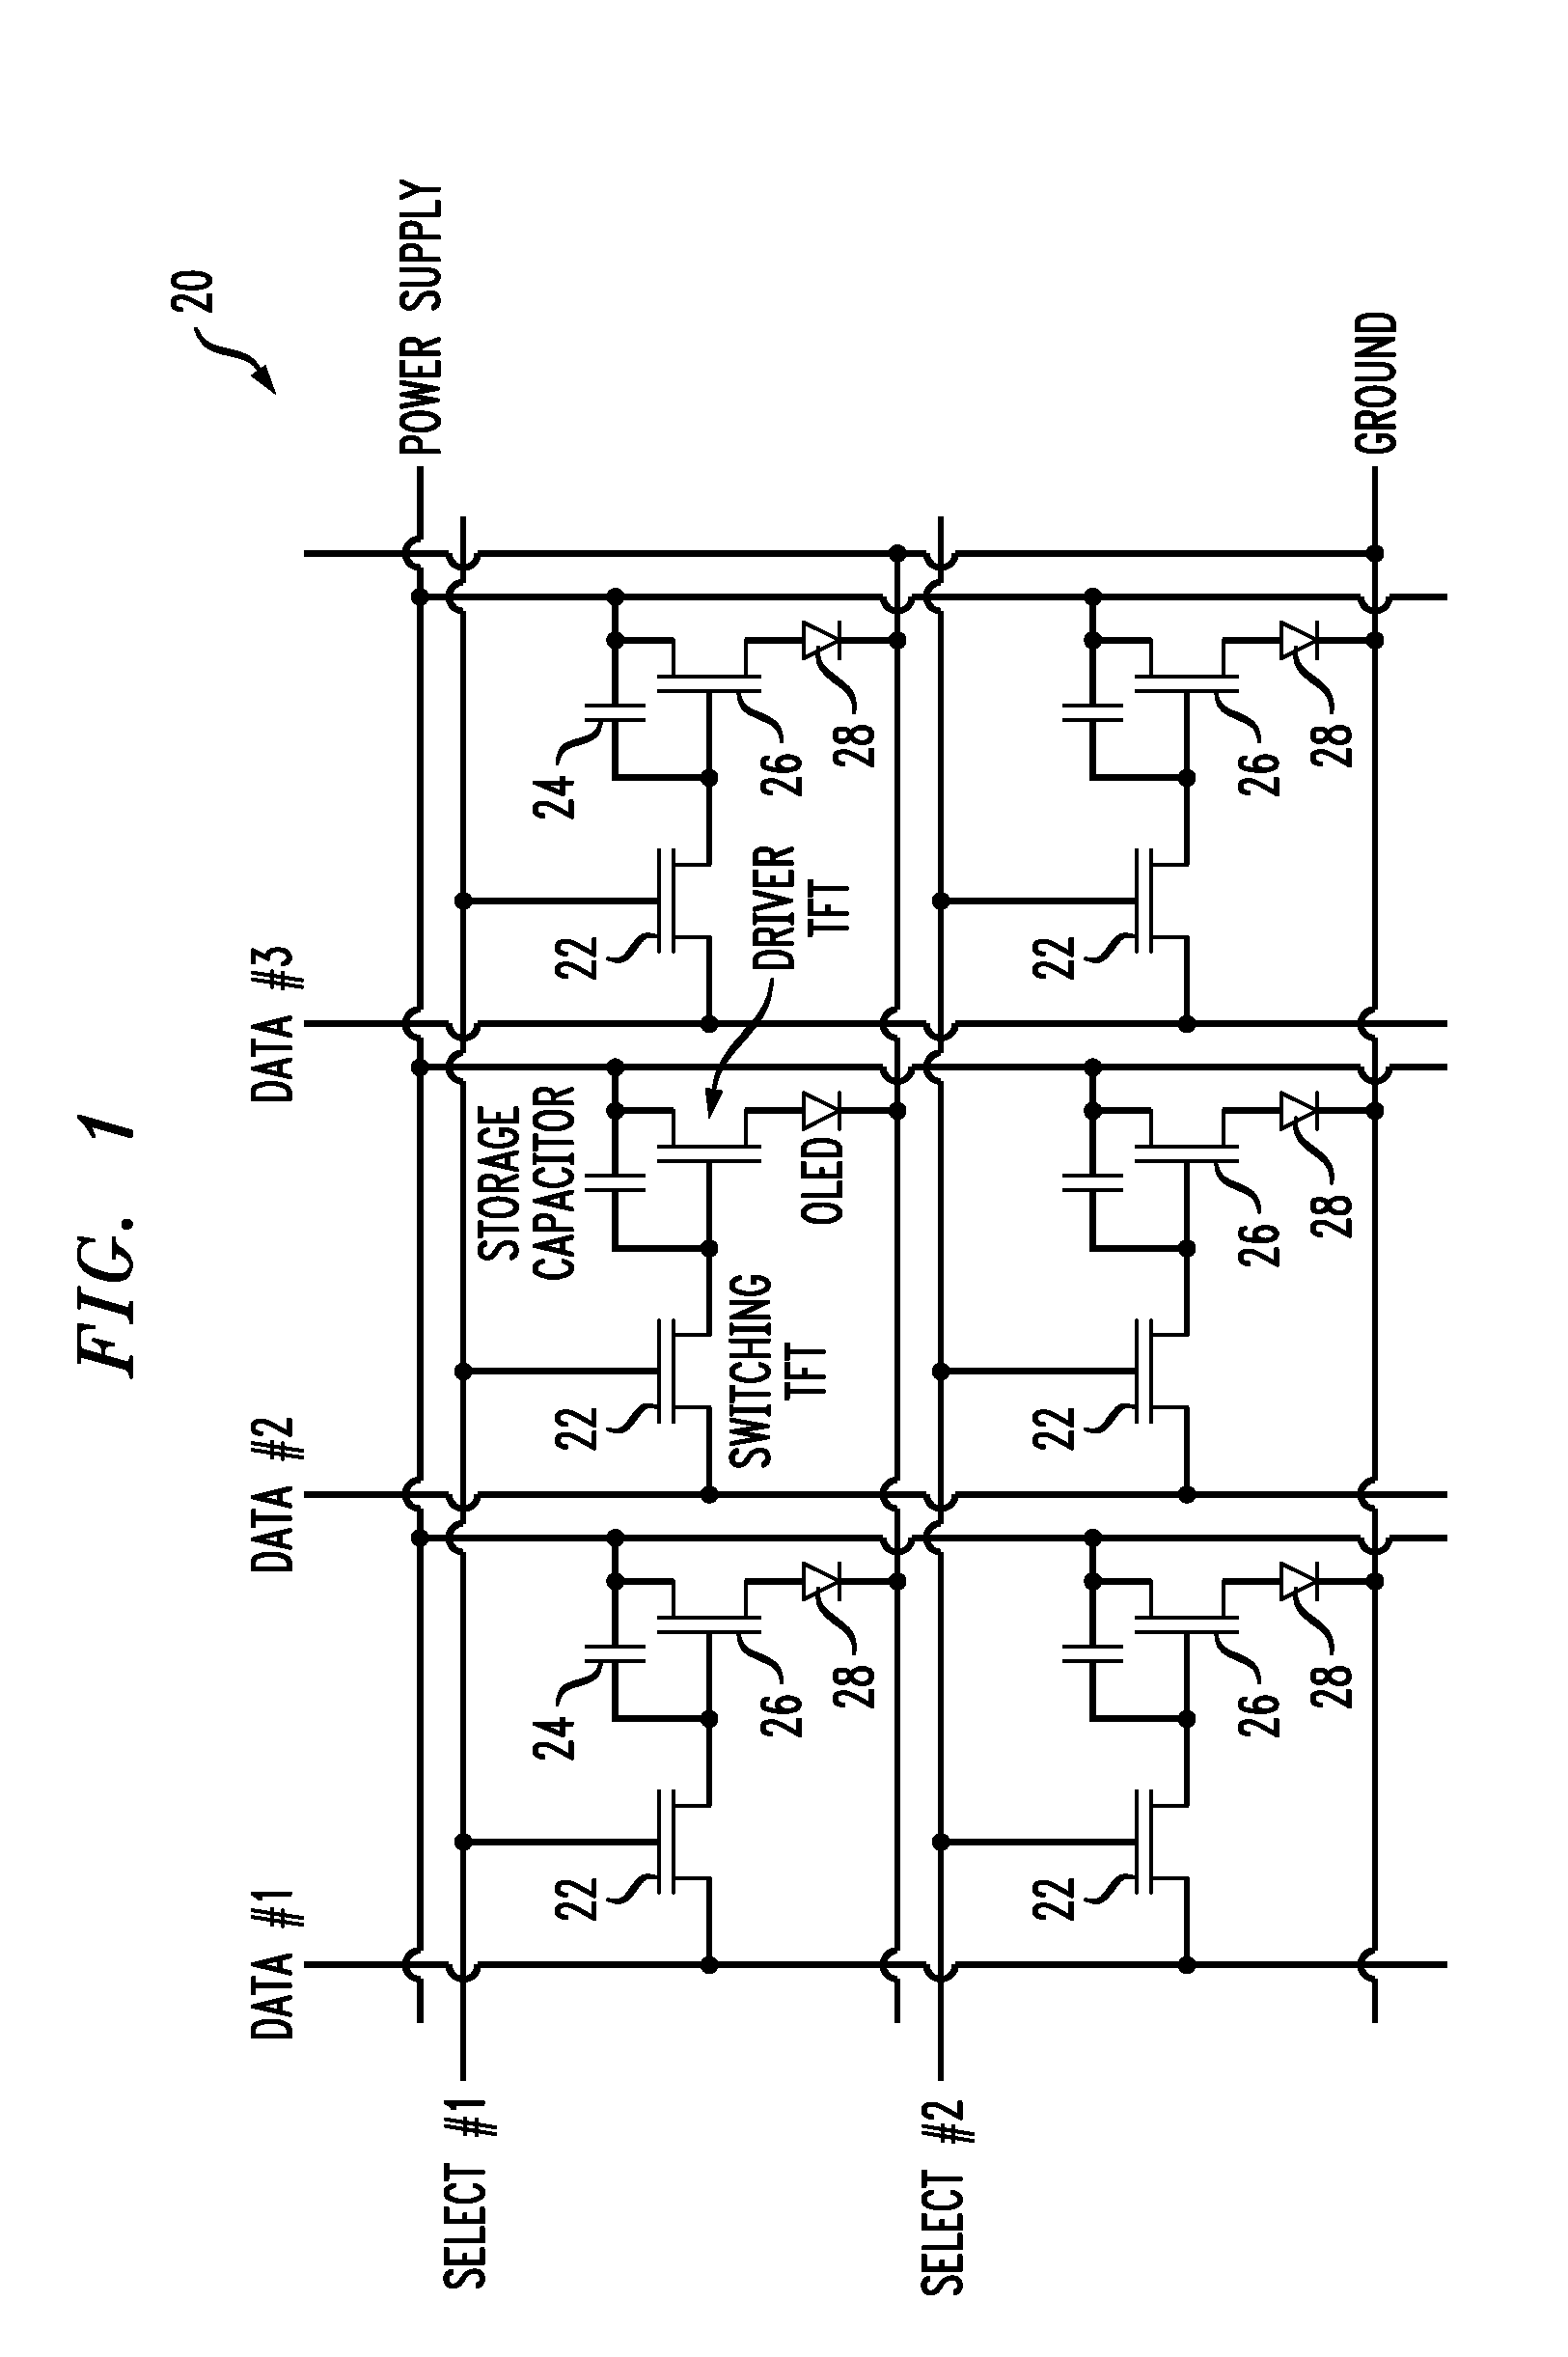 Hybrid high electron mobility transistor and active matrix structure